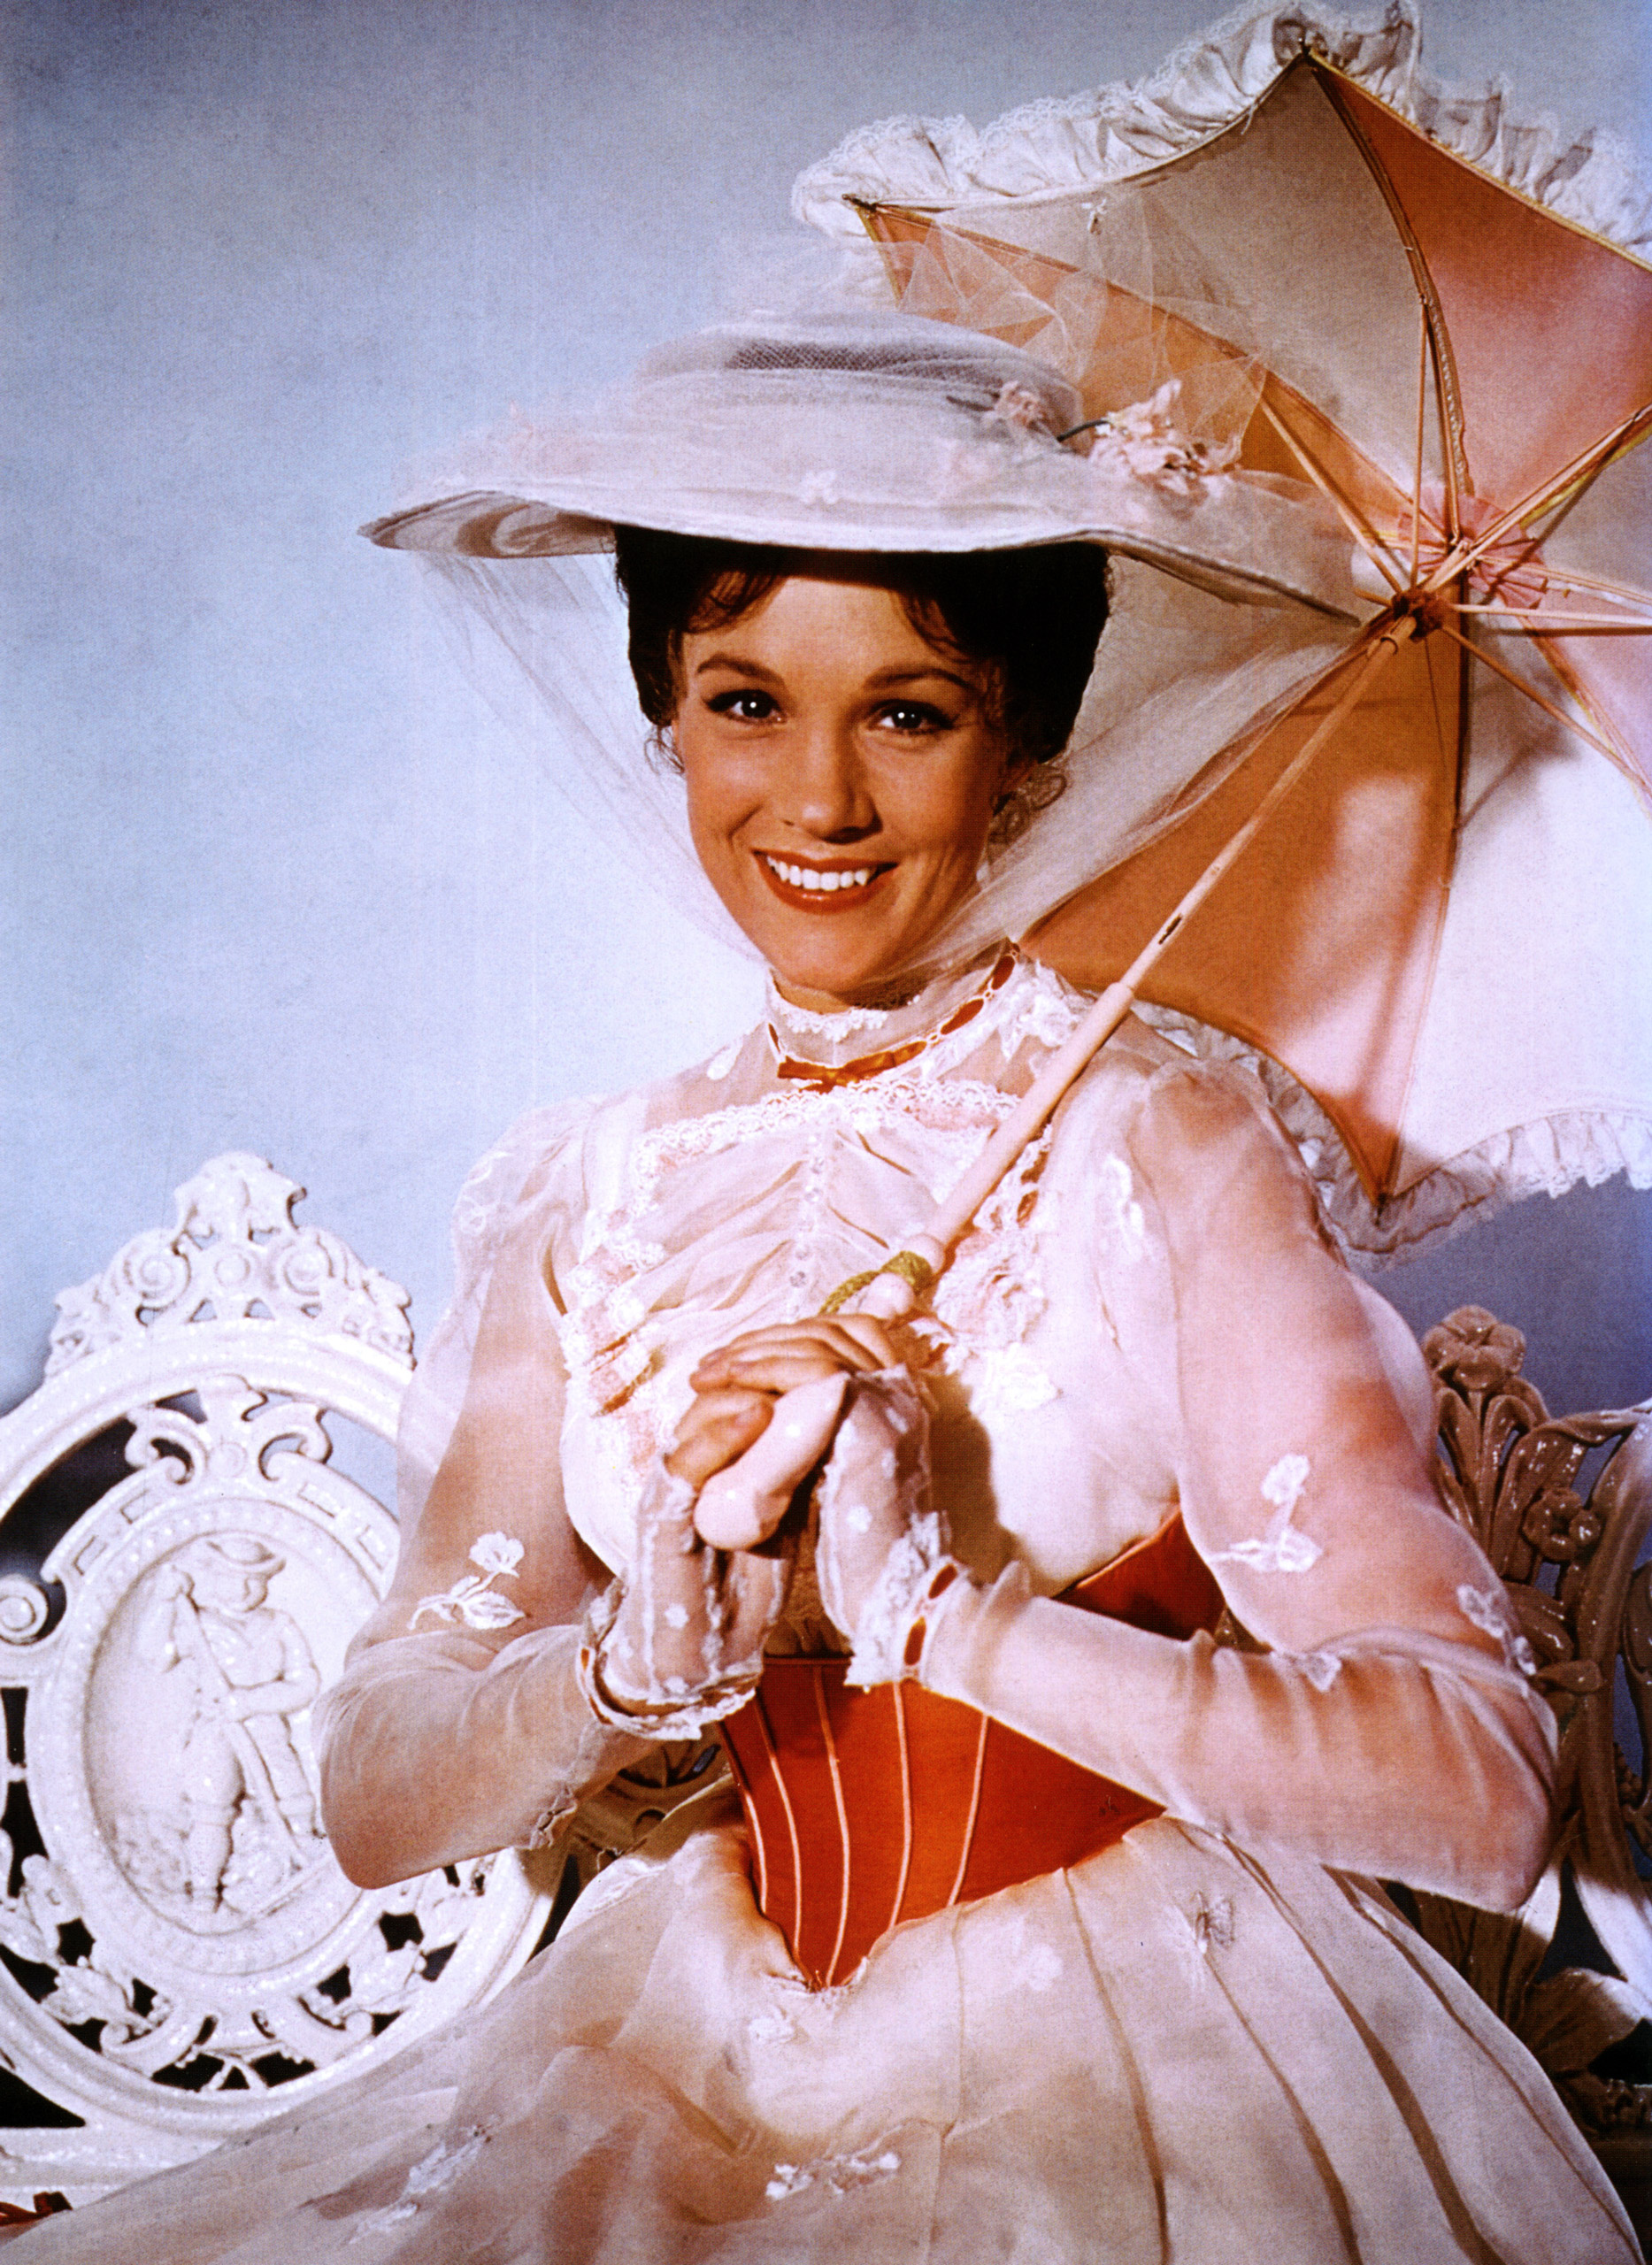 UNSPECIFIED - JANUARY 01: (AUSTRALIA OUT) Photo of English actress Julie Andrews dressed as the title character from the 1964 film Mary Poppins. (Photo by GAB Archive/Redferns)